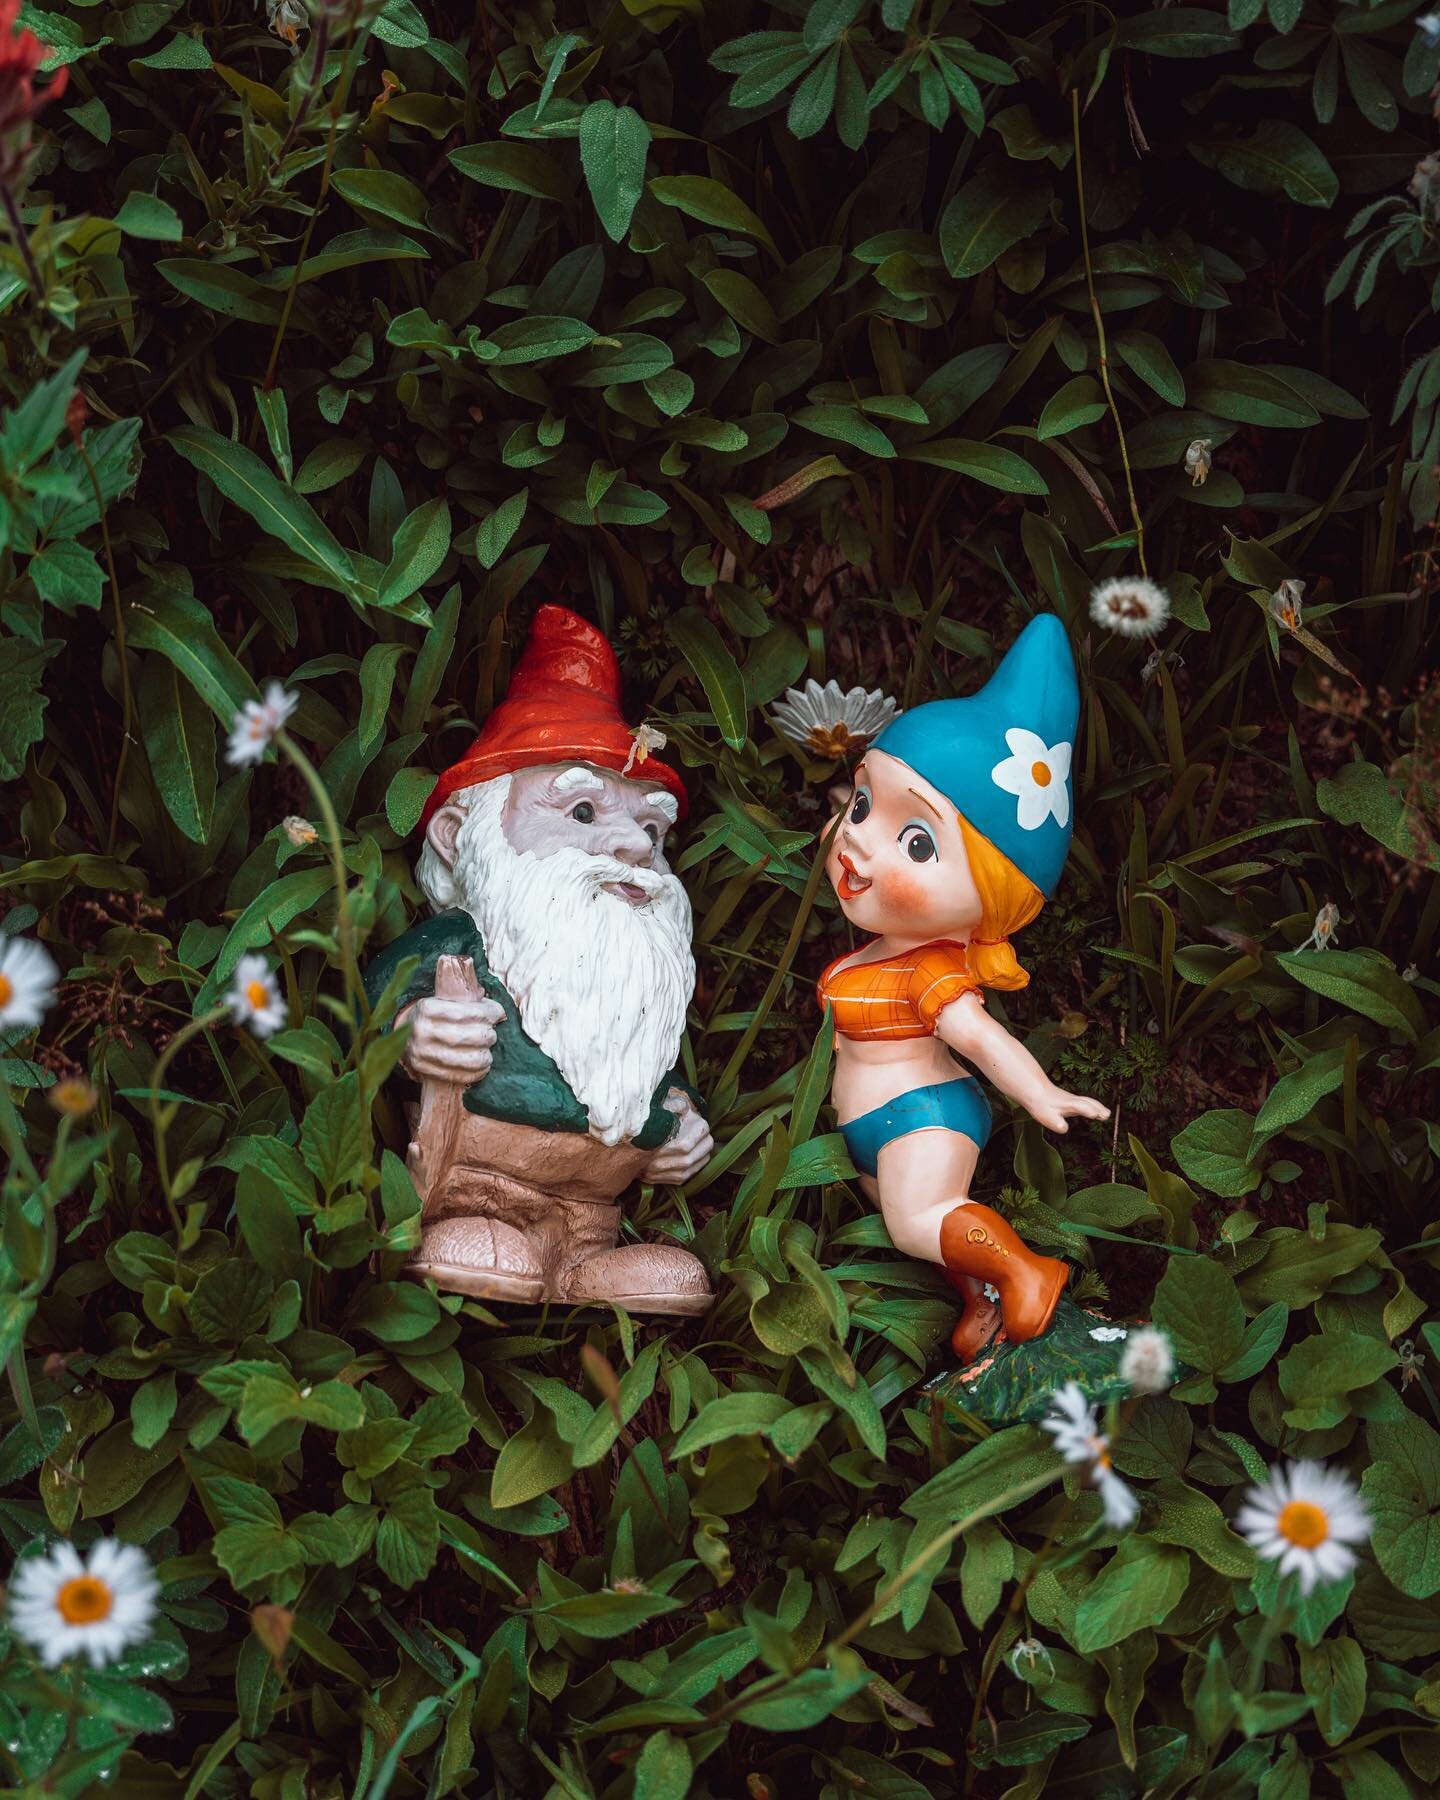 She&rsquo;s a 10 but she posts a gnome couple&rsquo;s shoot after months of radio silence. 👋🏻